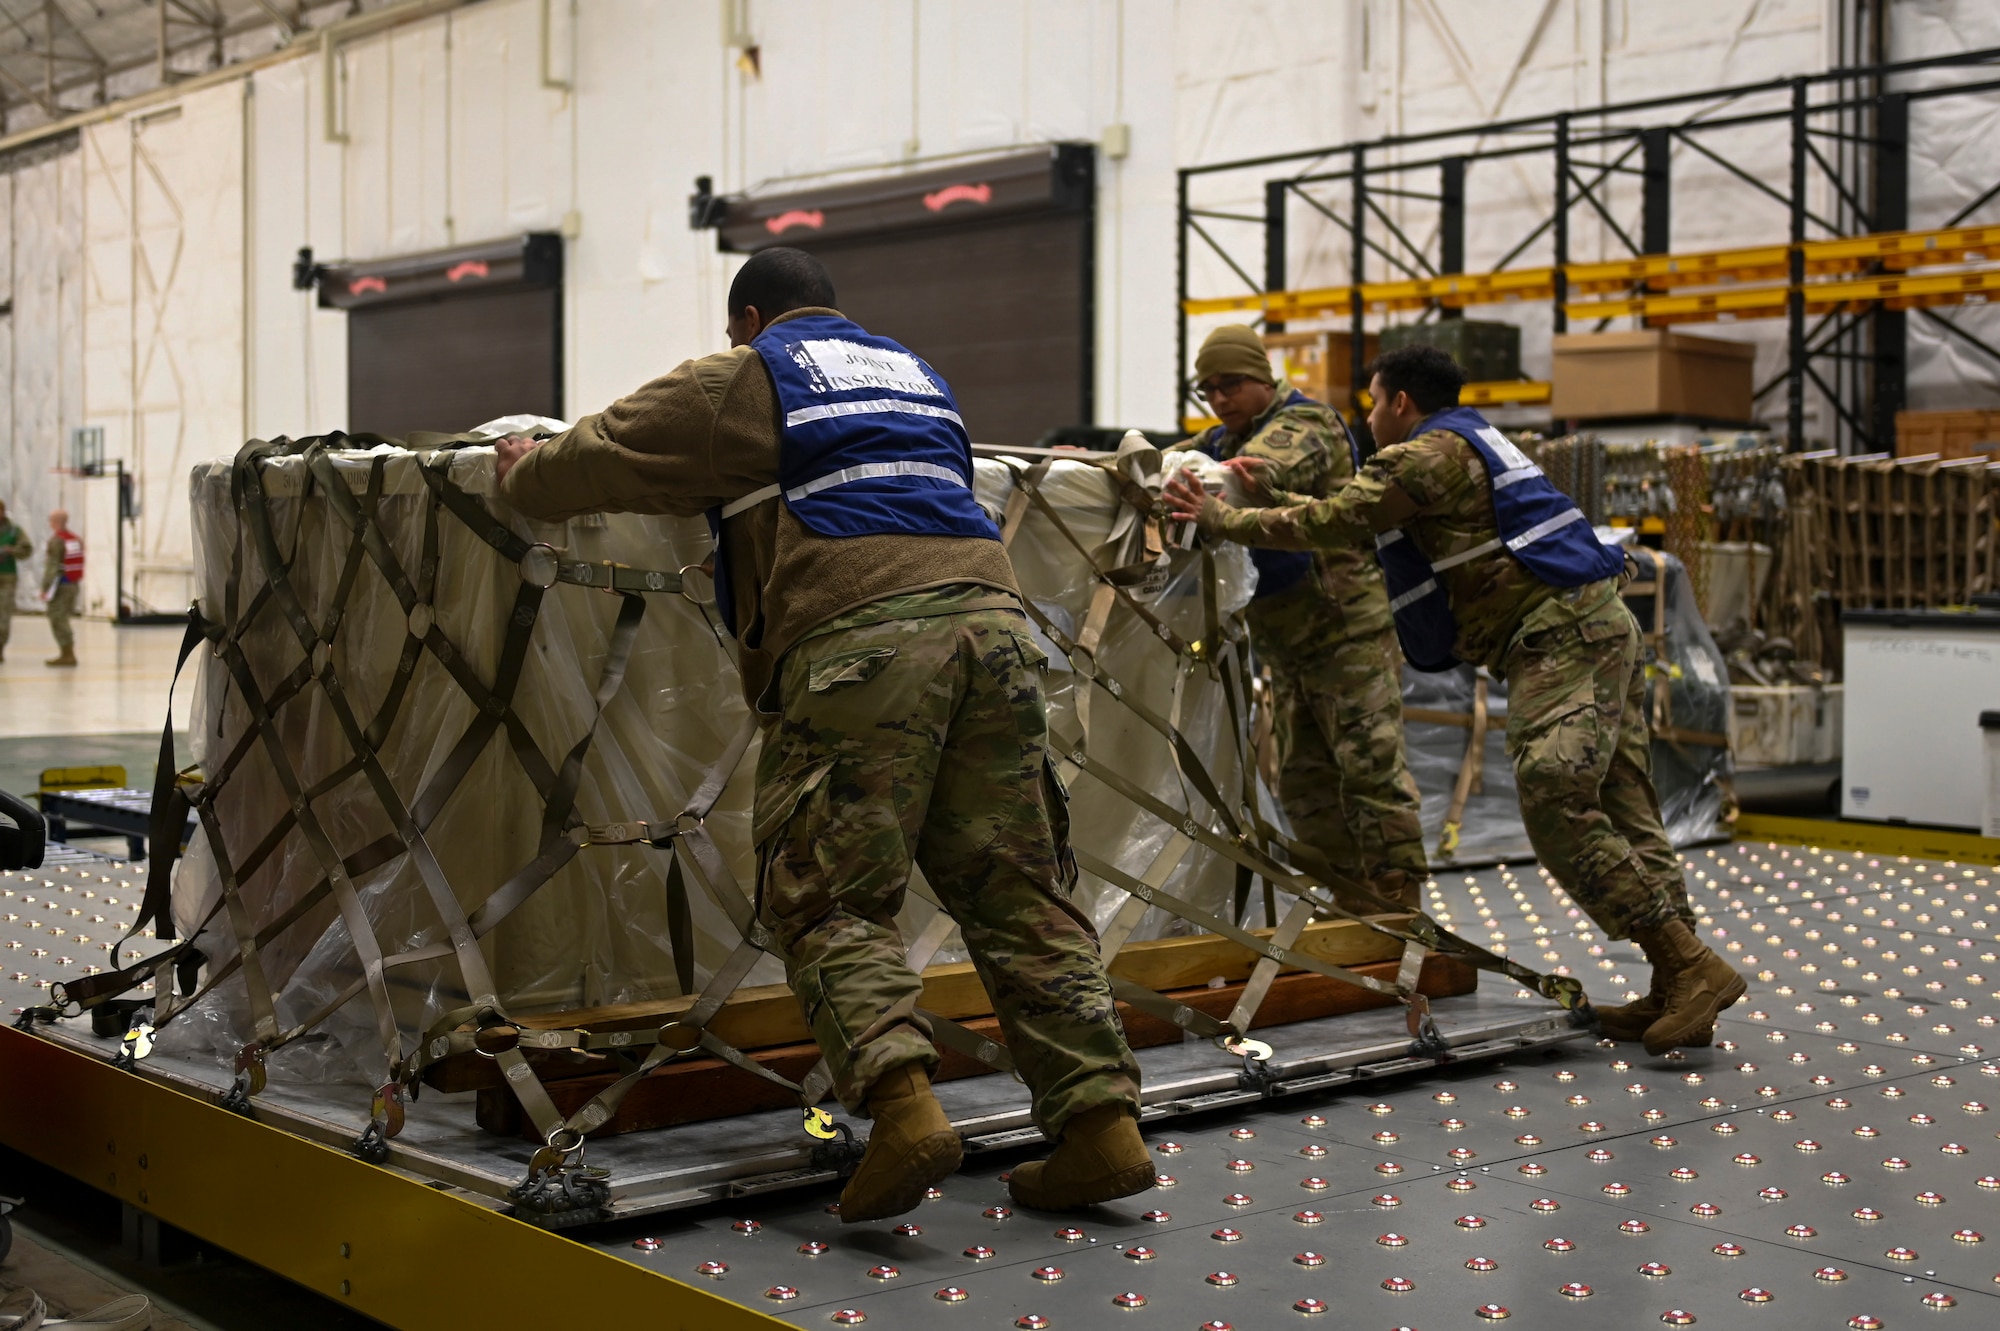 Airmen from the 92nd Logistic Readiness squadron inspect and move a pallet of equipment for processing during Titan Fury 23-1 at Fairchild Air Force Base, Washington, Nov. 7, 2022. during the Titan Fury 23-1 exercise. By conducting exercises like Titan Fury, Team Fairchild hones the skills required to execute its air refueling and supporting strategic deterrence missions as the world’s premier air refueling wing. (U.S. Air Force photo by Capt. Teri Bunce)